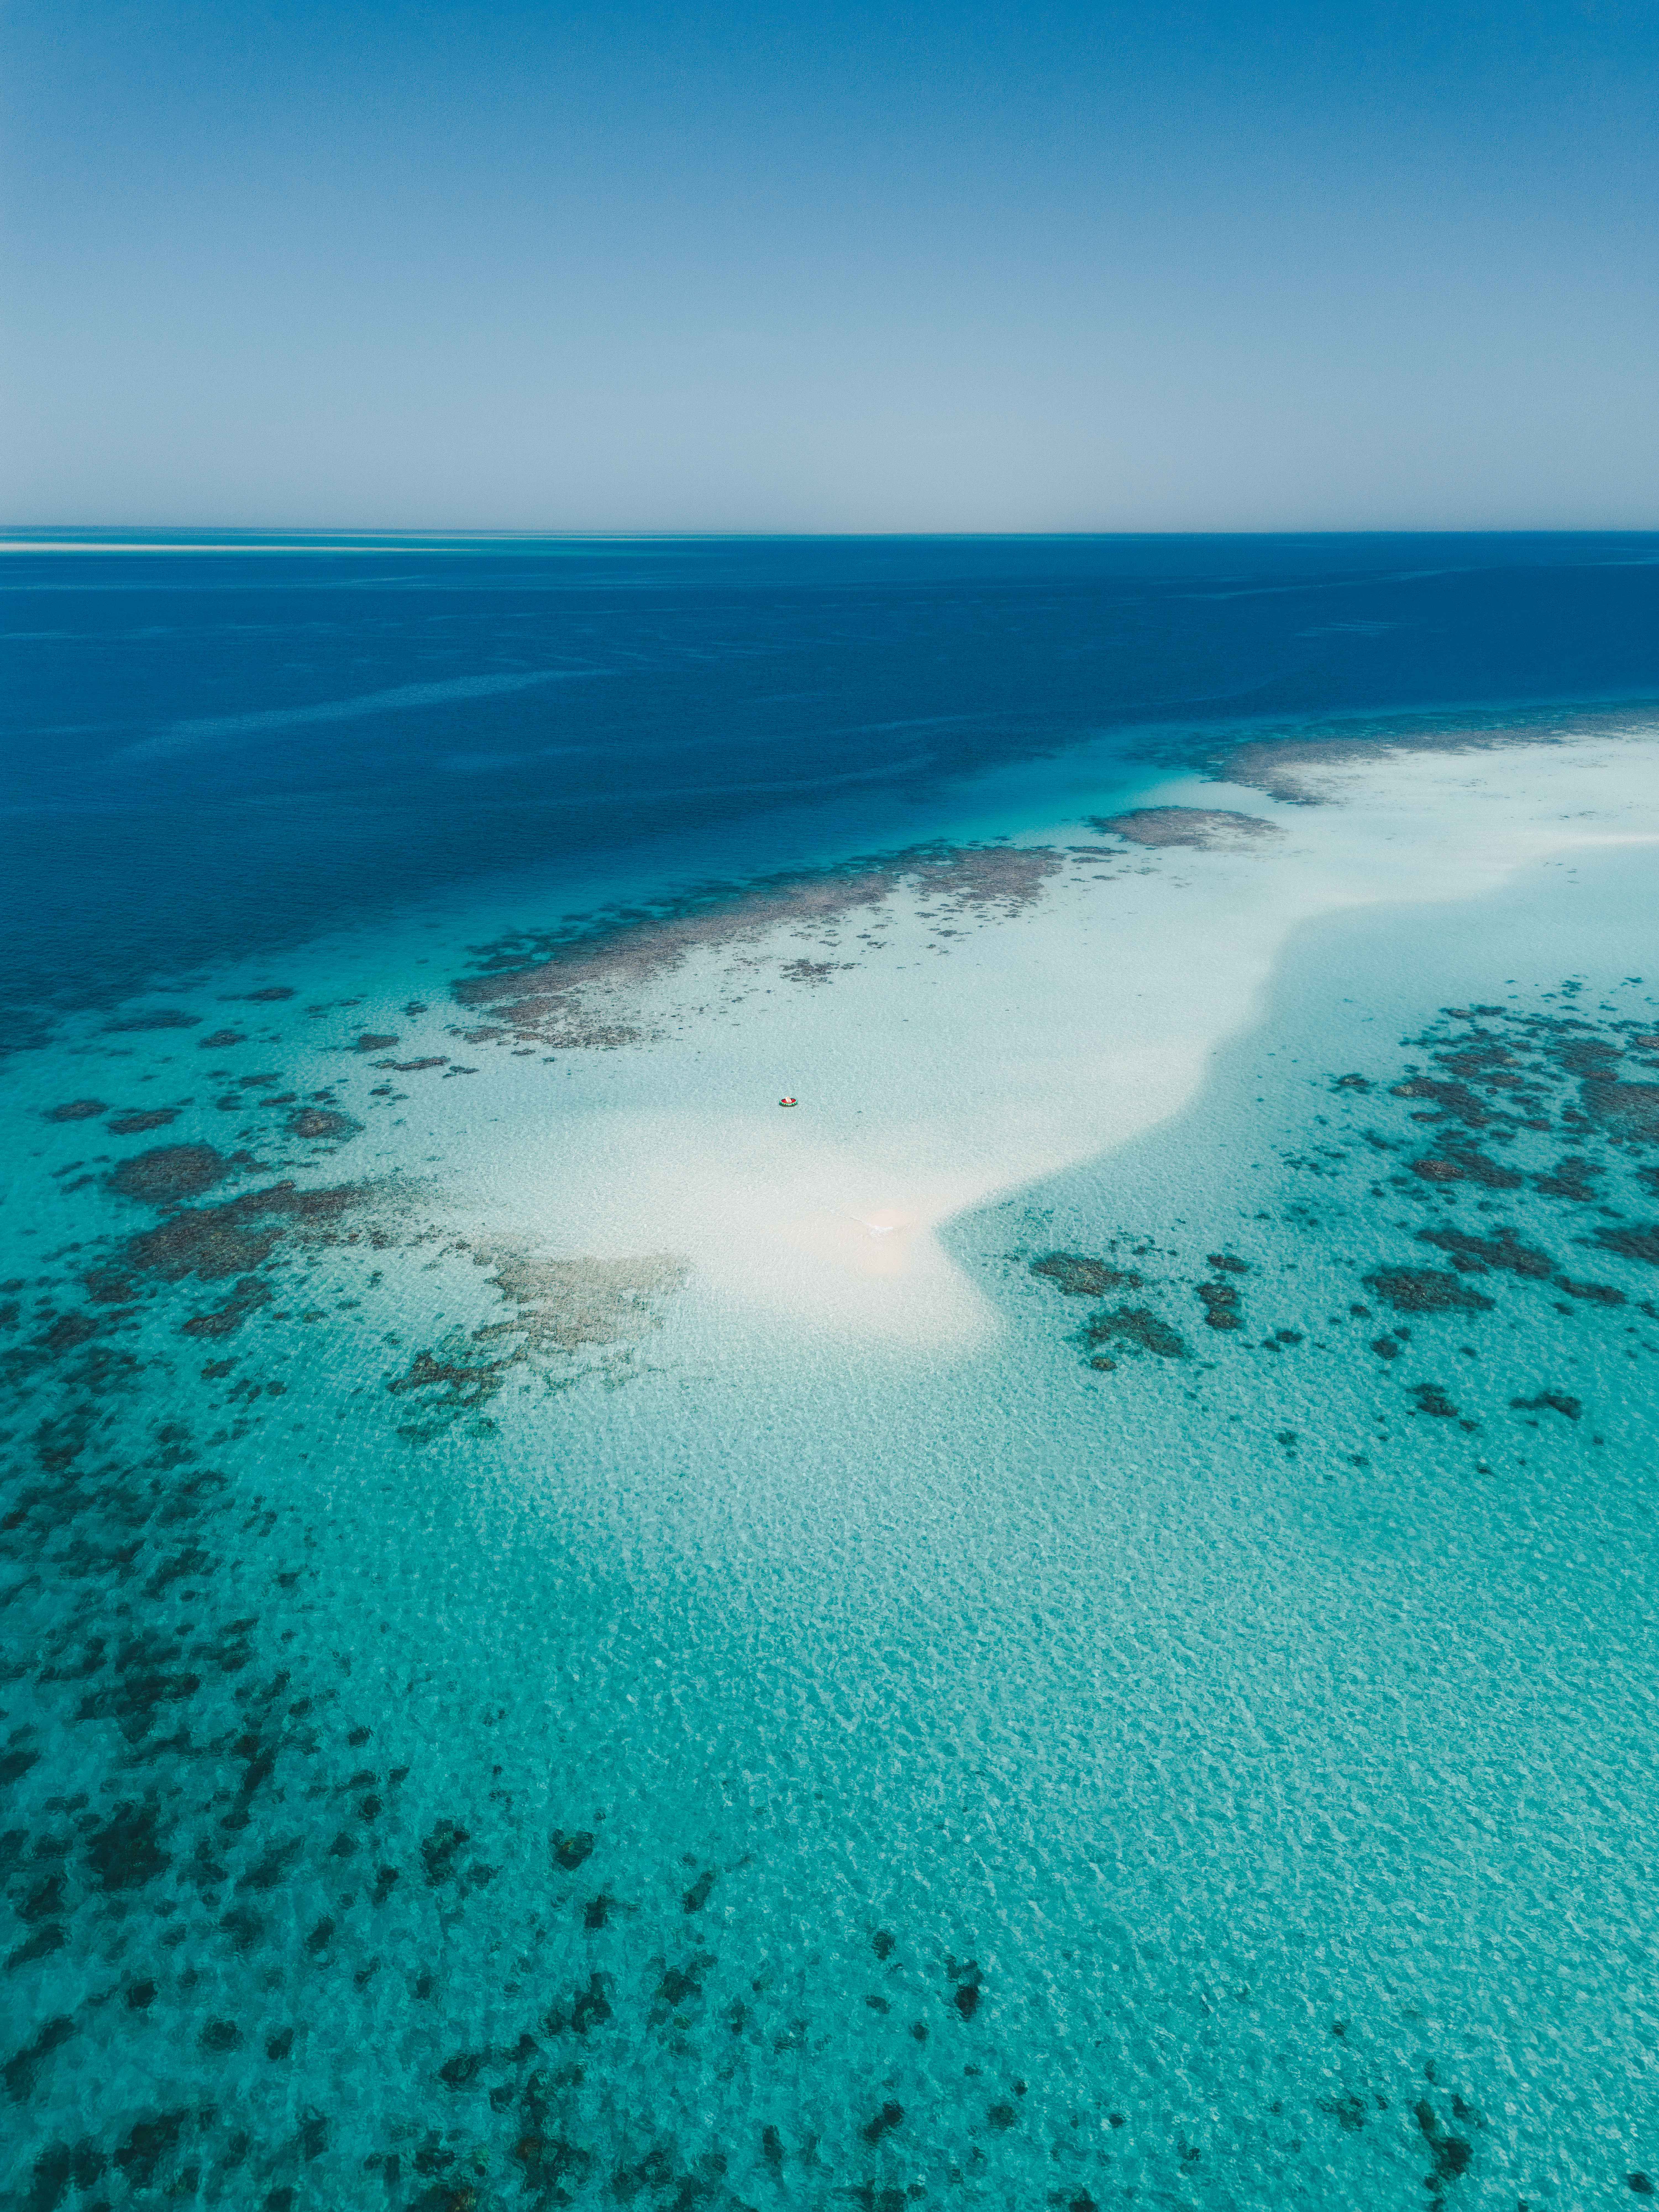 Red Sea paradise captured from the sky! Stunning aerial view showcases crystal-clear waters and white sand beaches.